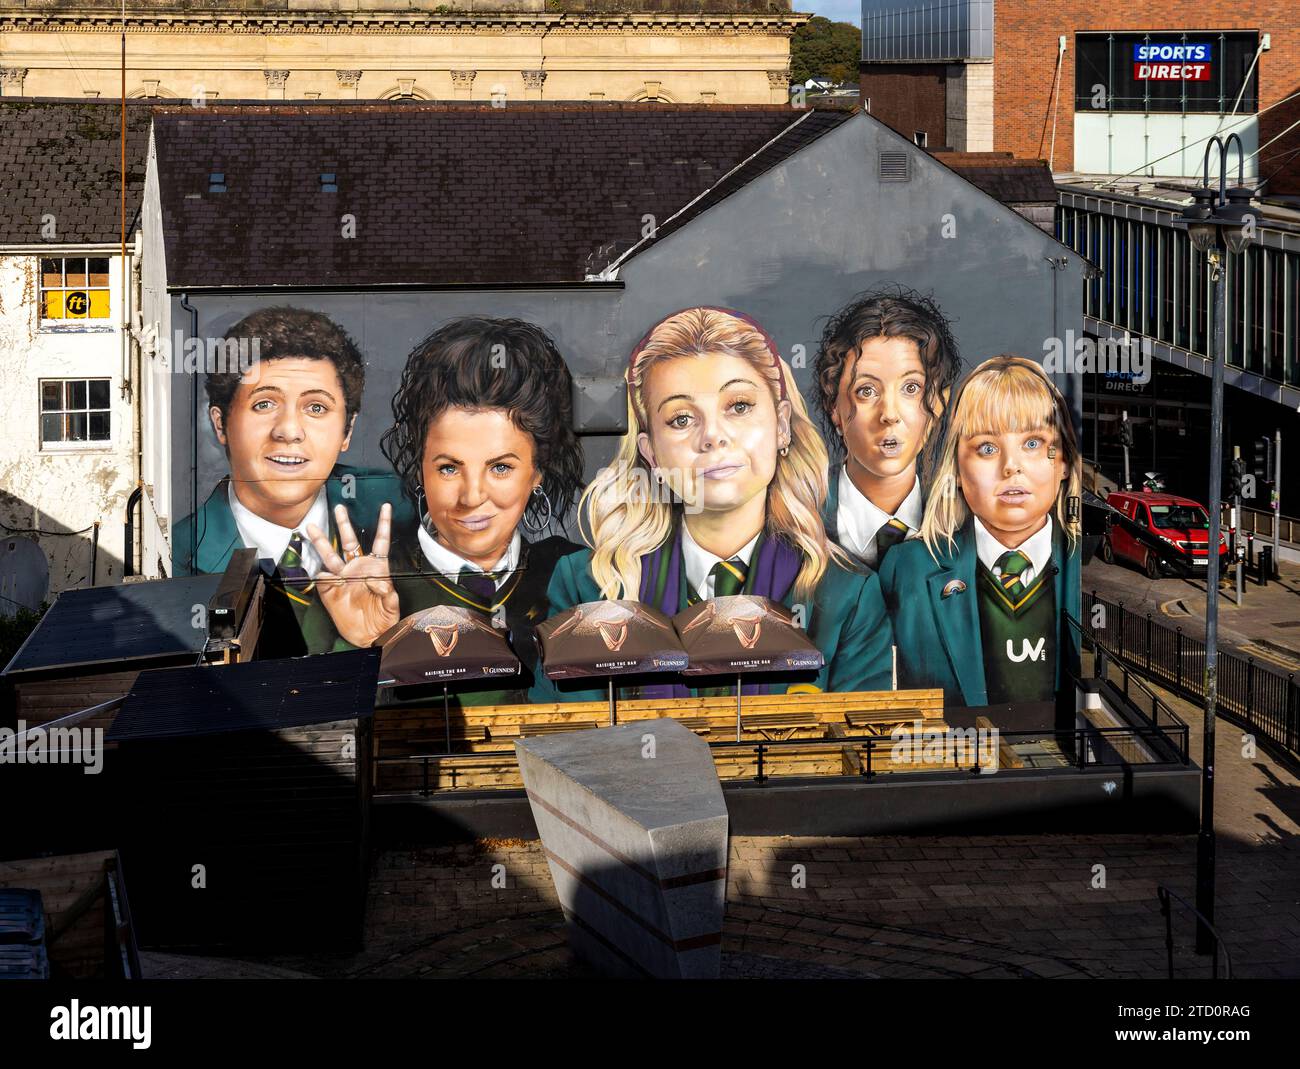 Mural dedicated to the famous award-winning series 'Derry Girls' on Orchard Street, in the city center of Derry, Northern Ireland Stock Photo